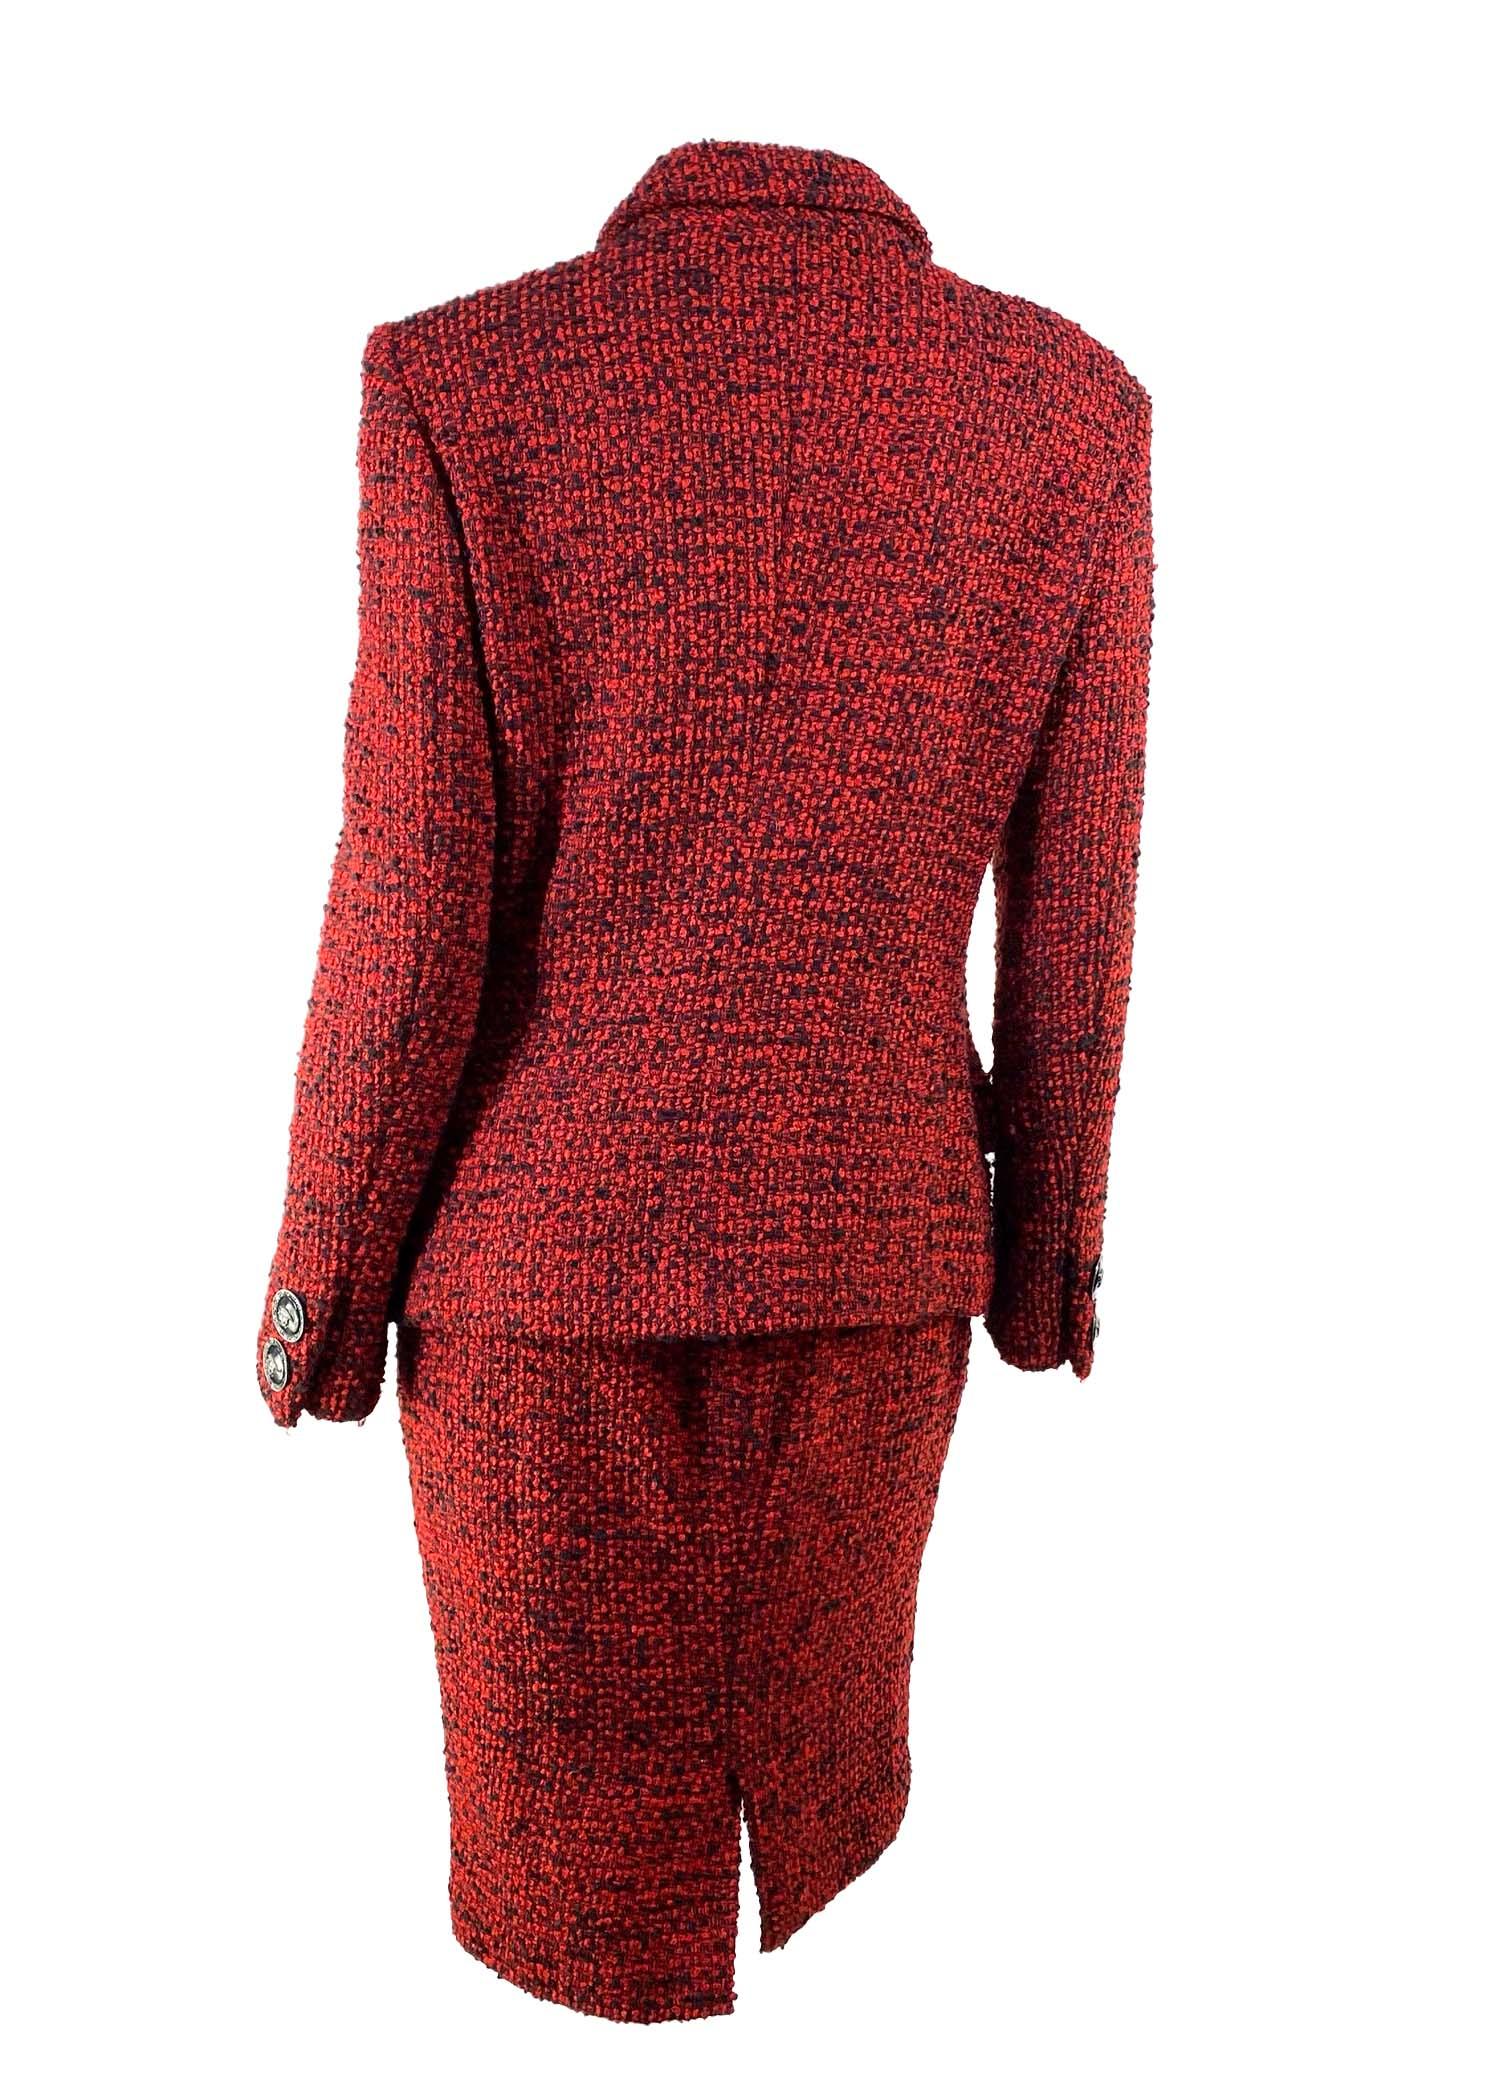 Women's F/W 1995 Gianni Versace Couture Runway Red Bouclé Tweed Skirt Suit Documented  For Sale